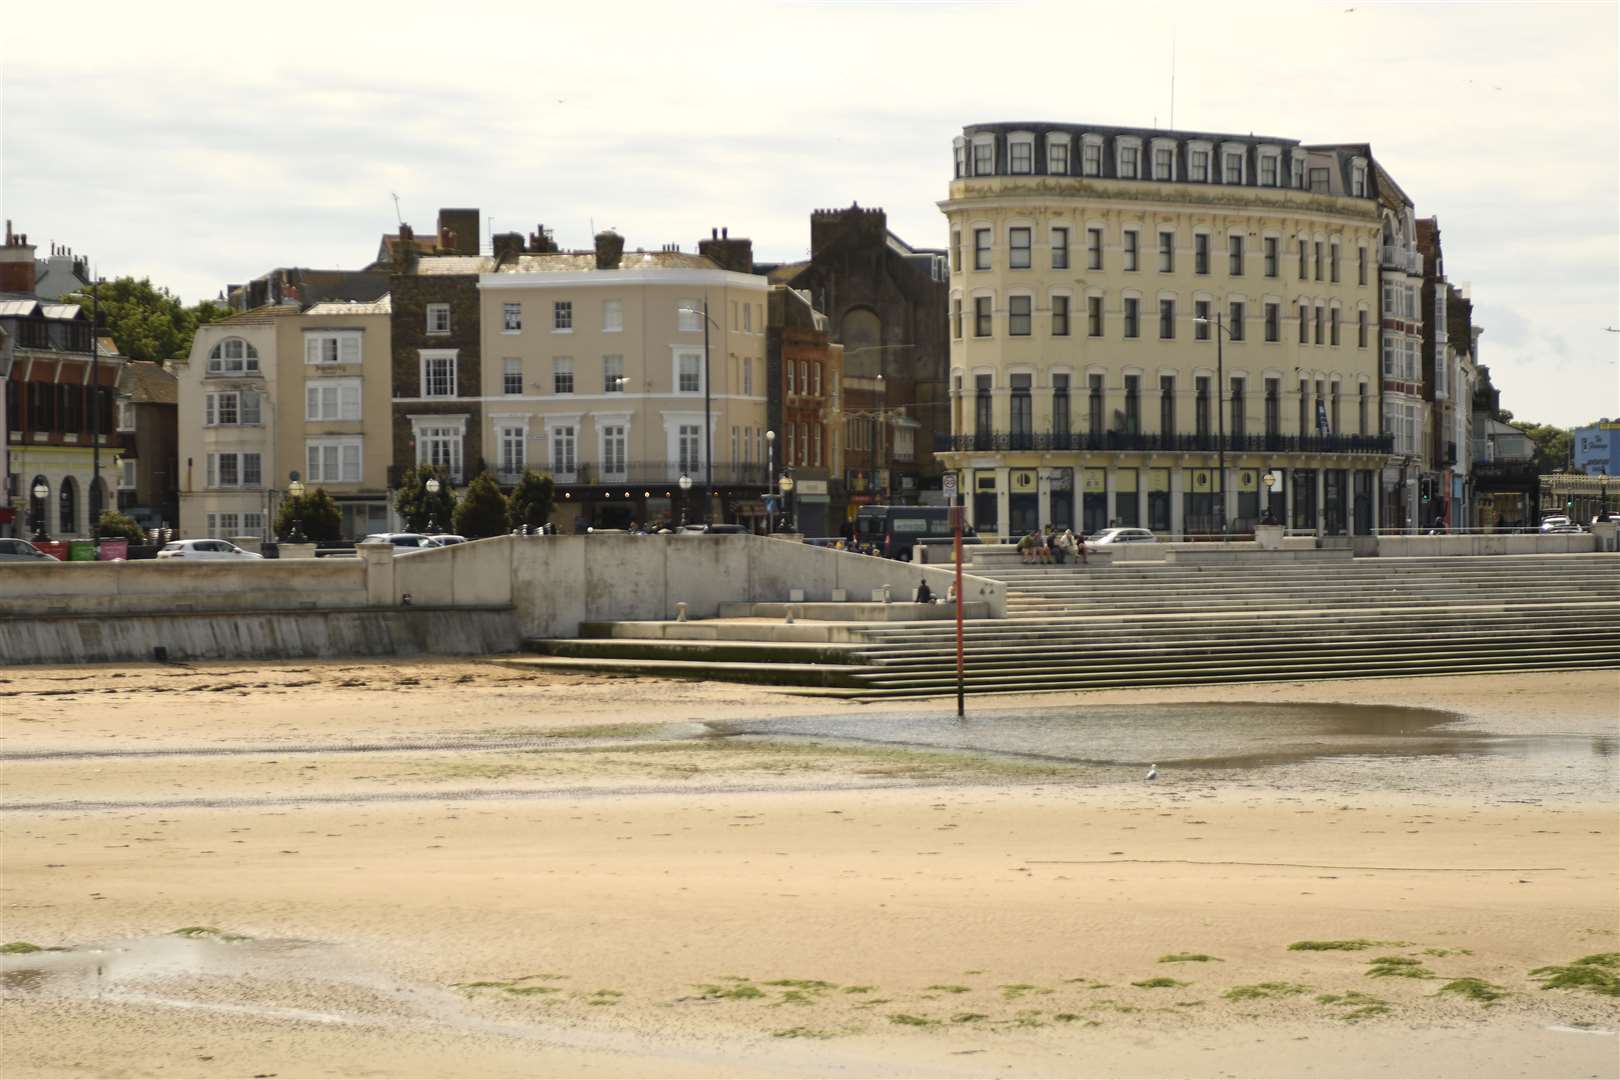 The view across Margate Main Sands